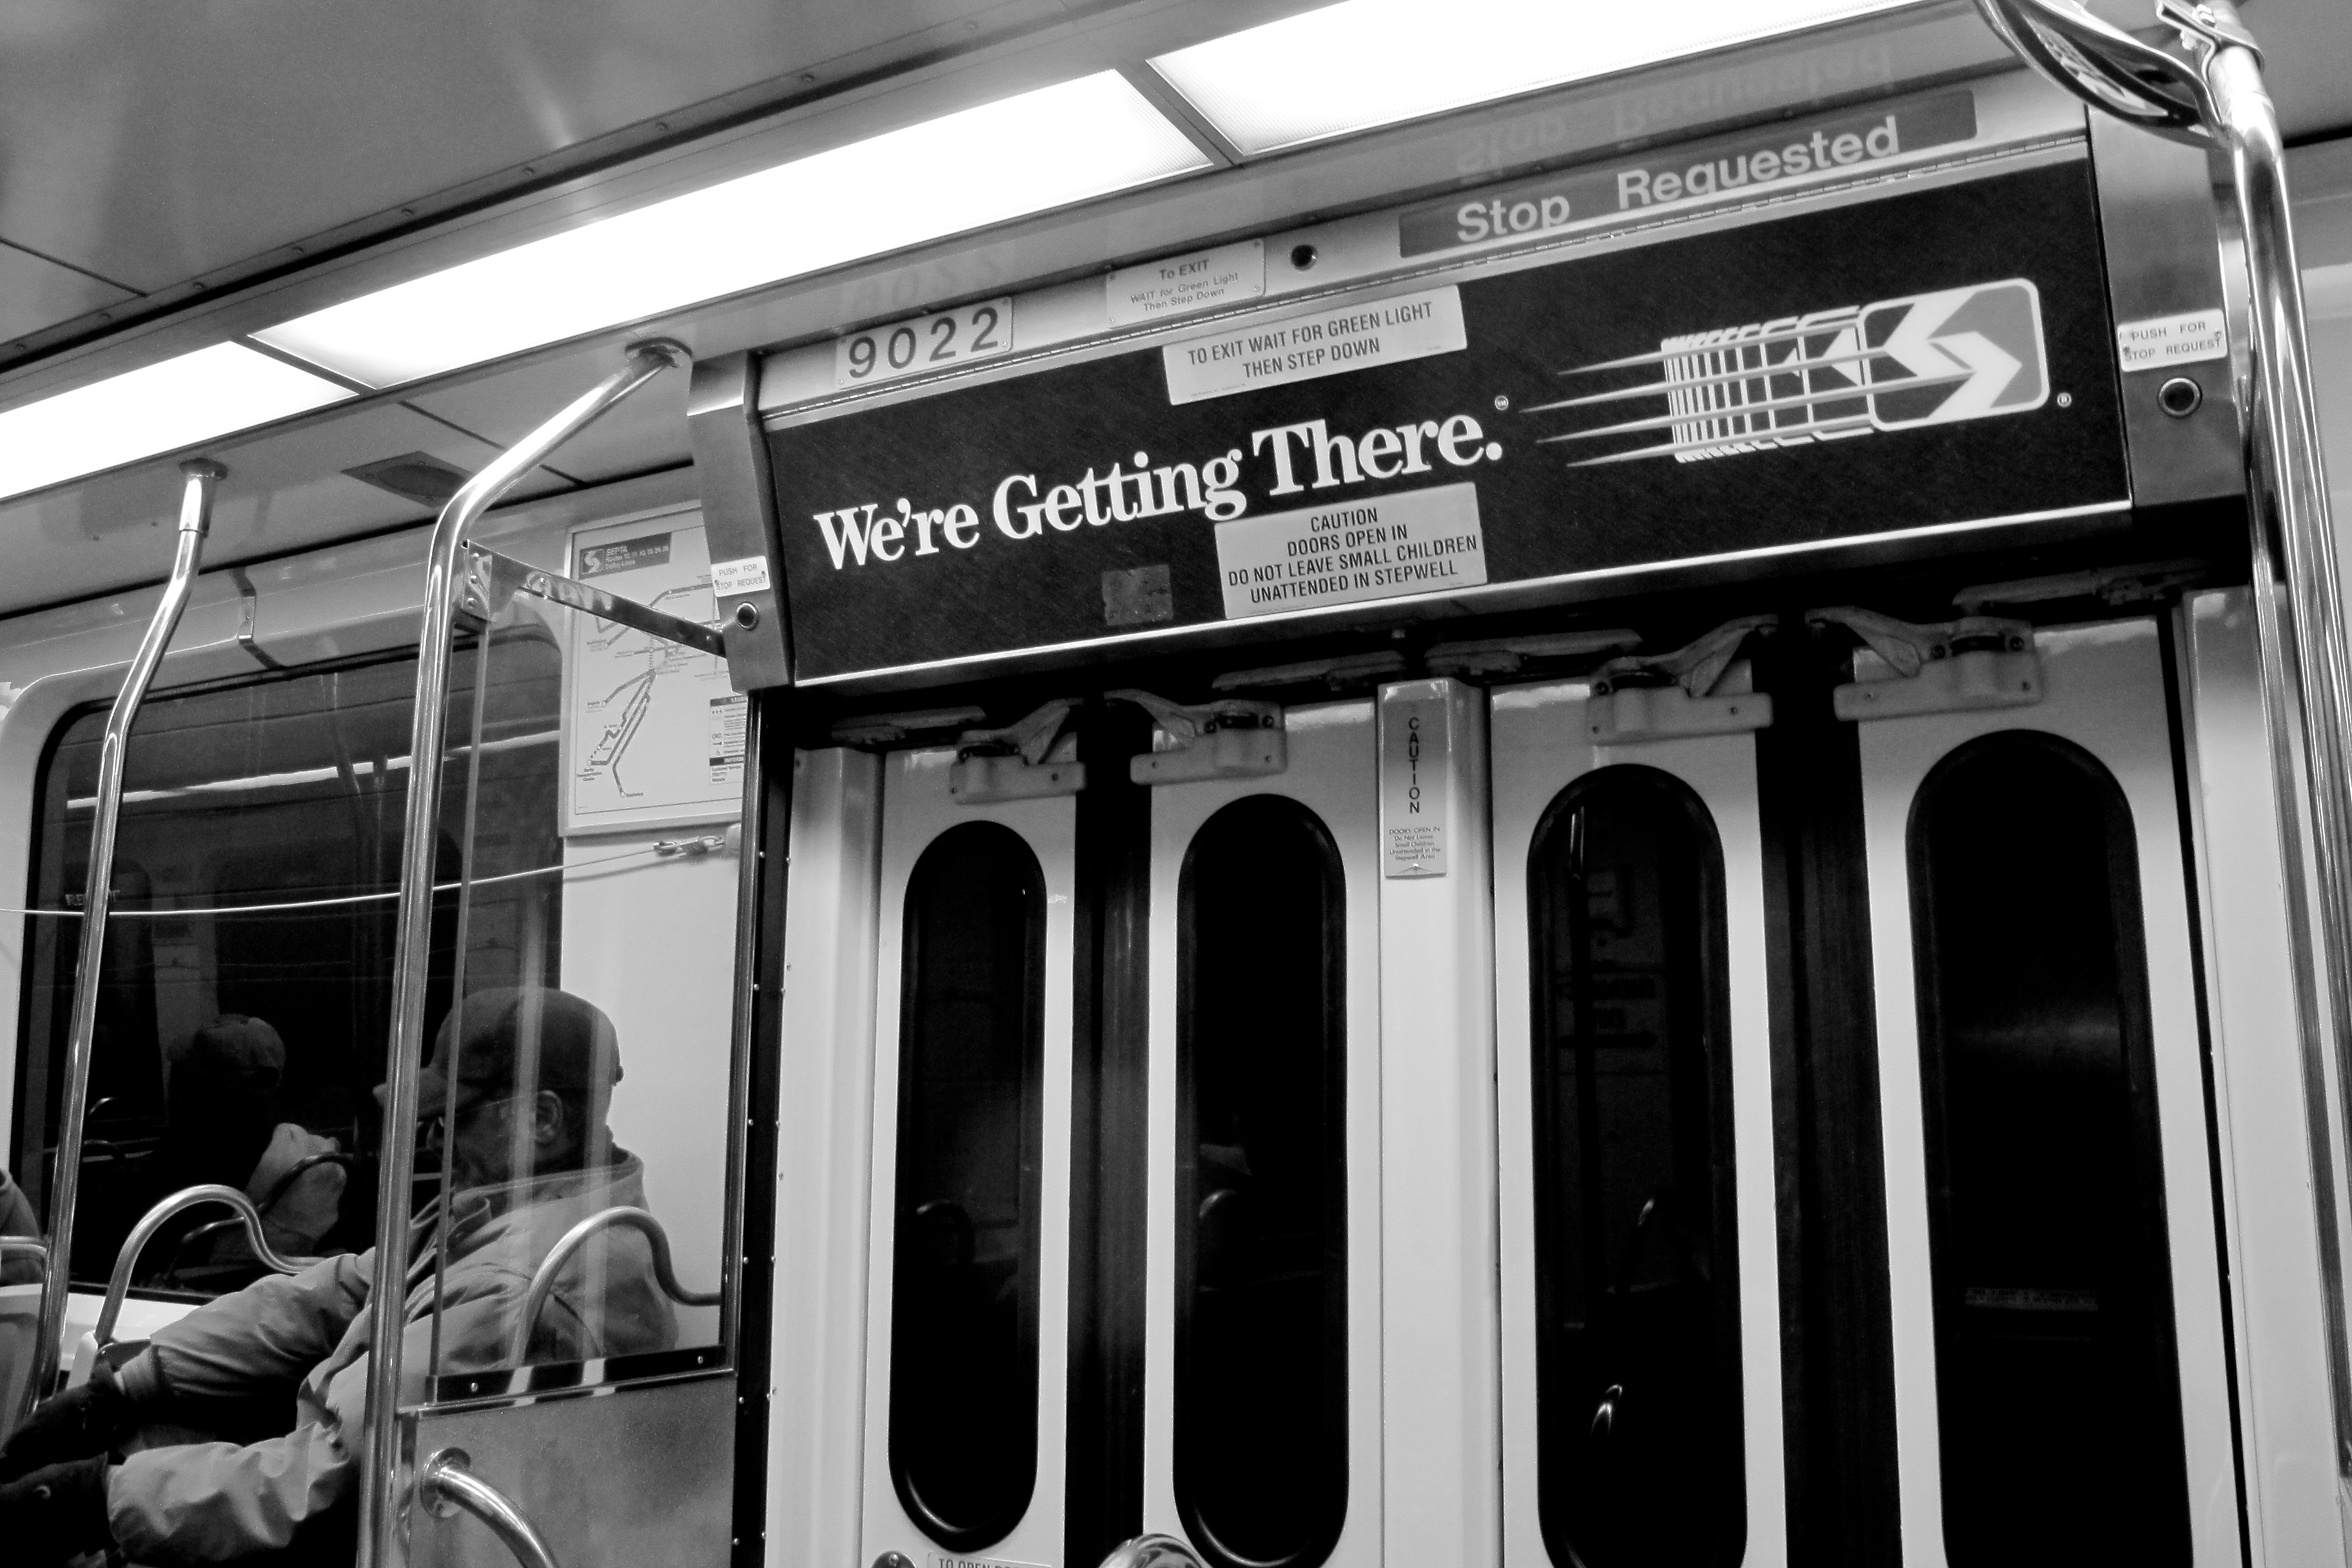 Even thought you'll still see a sign every now and again, SEPTA's slogan isn't 'We're Getting There' anymore.